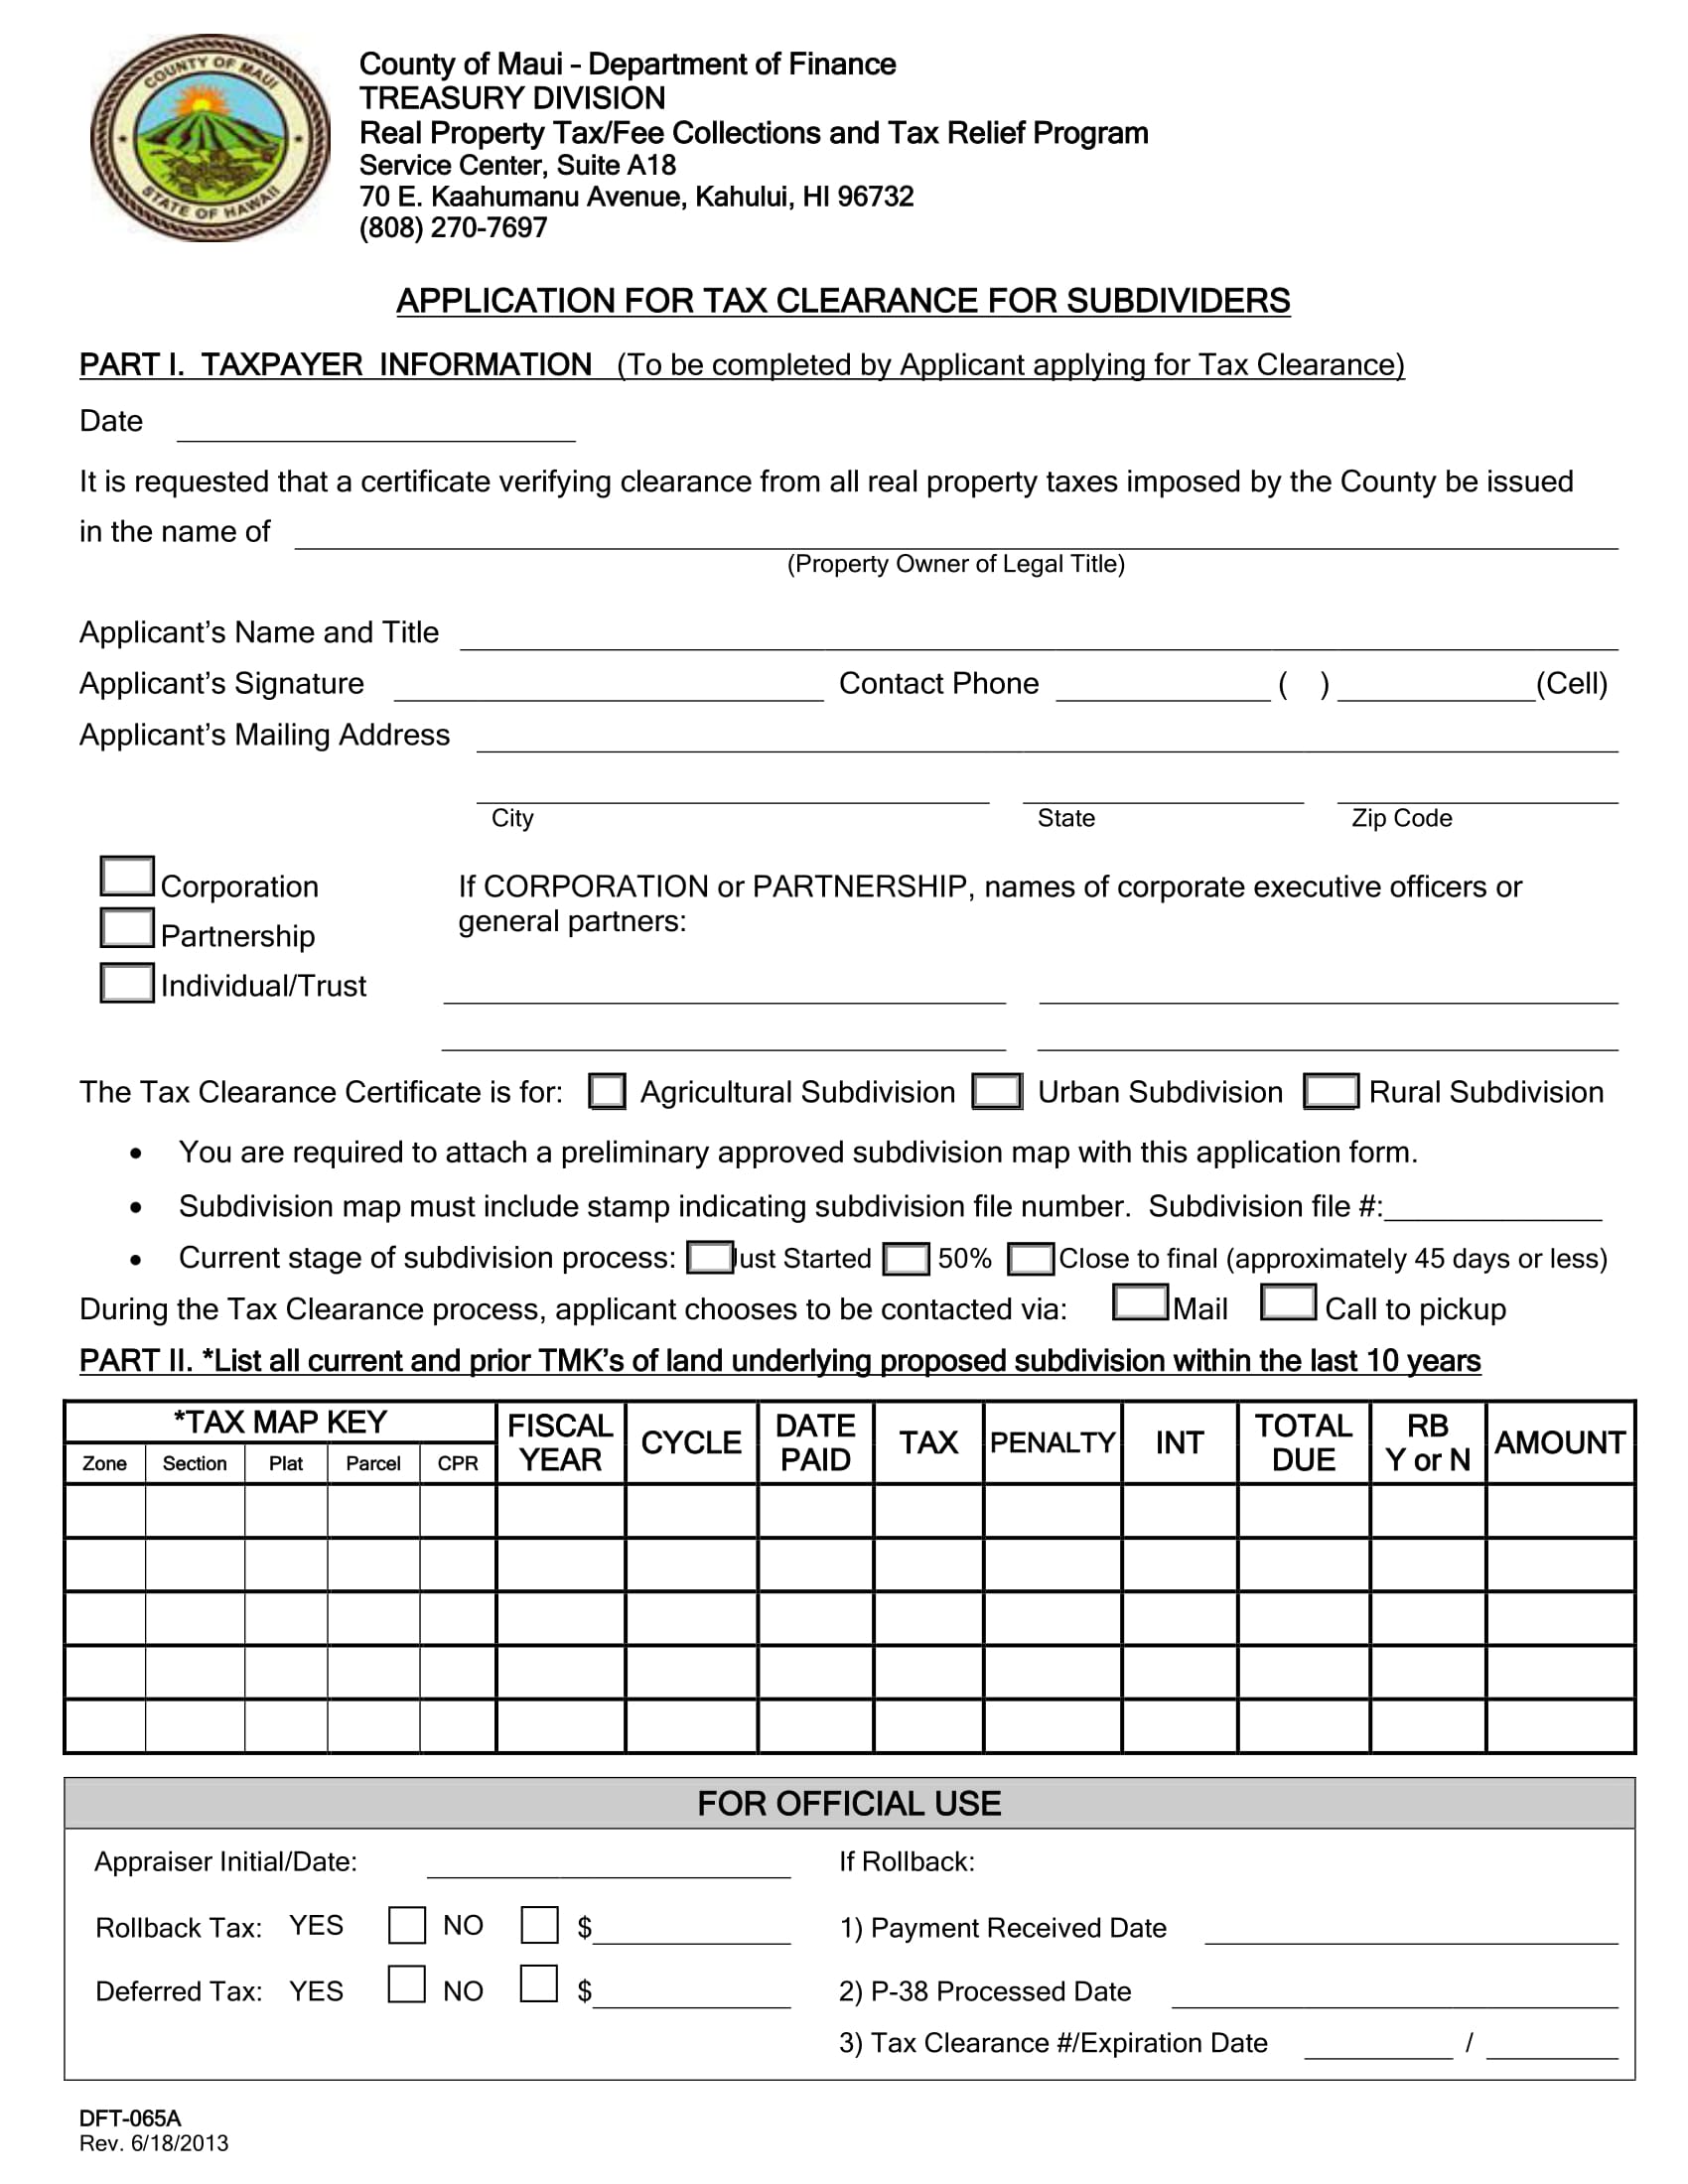 subdividers tax clearance application form 1